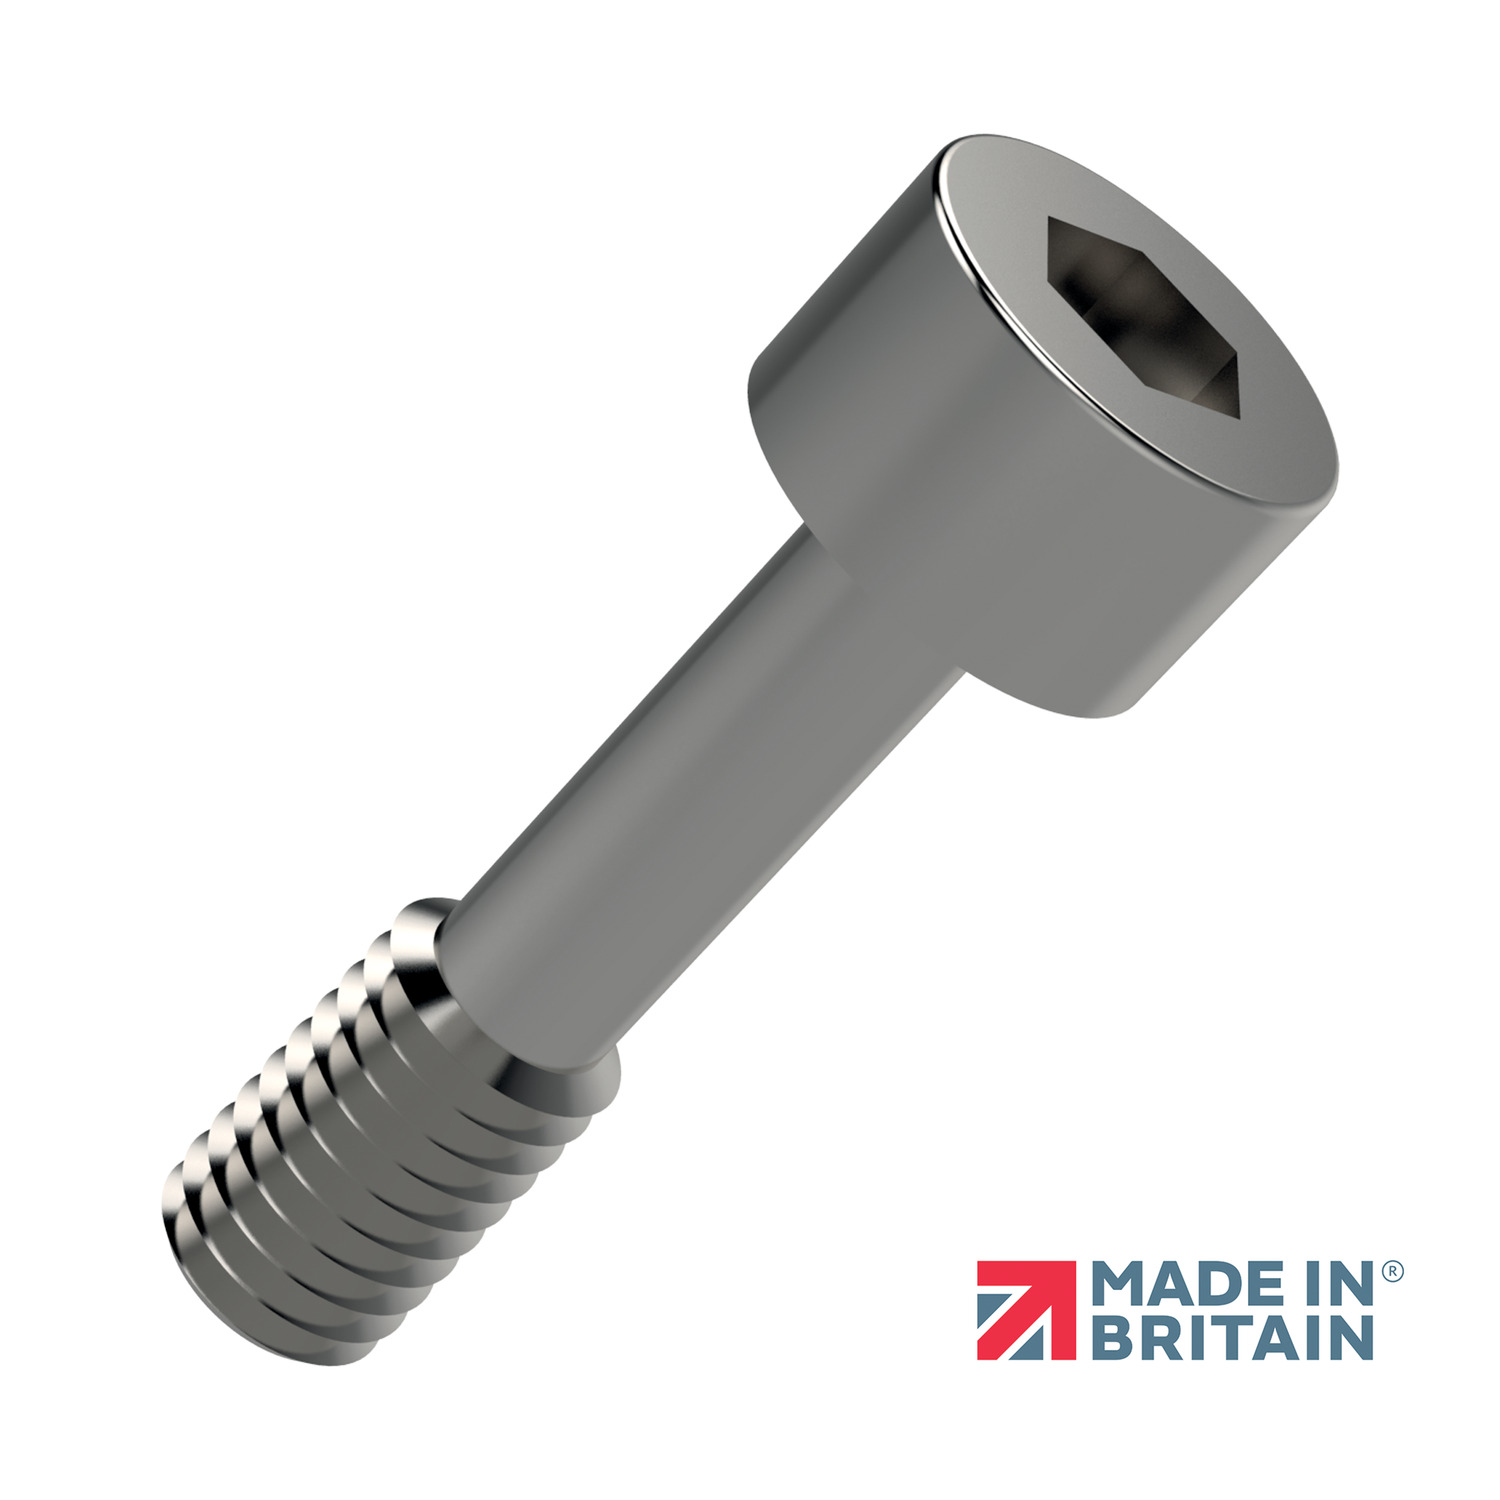 Captive Screws - Cap Head Our standard range of captive screws with thread sizes from M3 to M12. Captive screws provide added security when used as fastenings because they do not fall out of panels even when loosened.